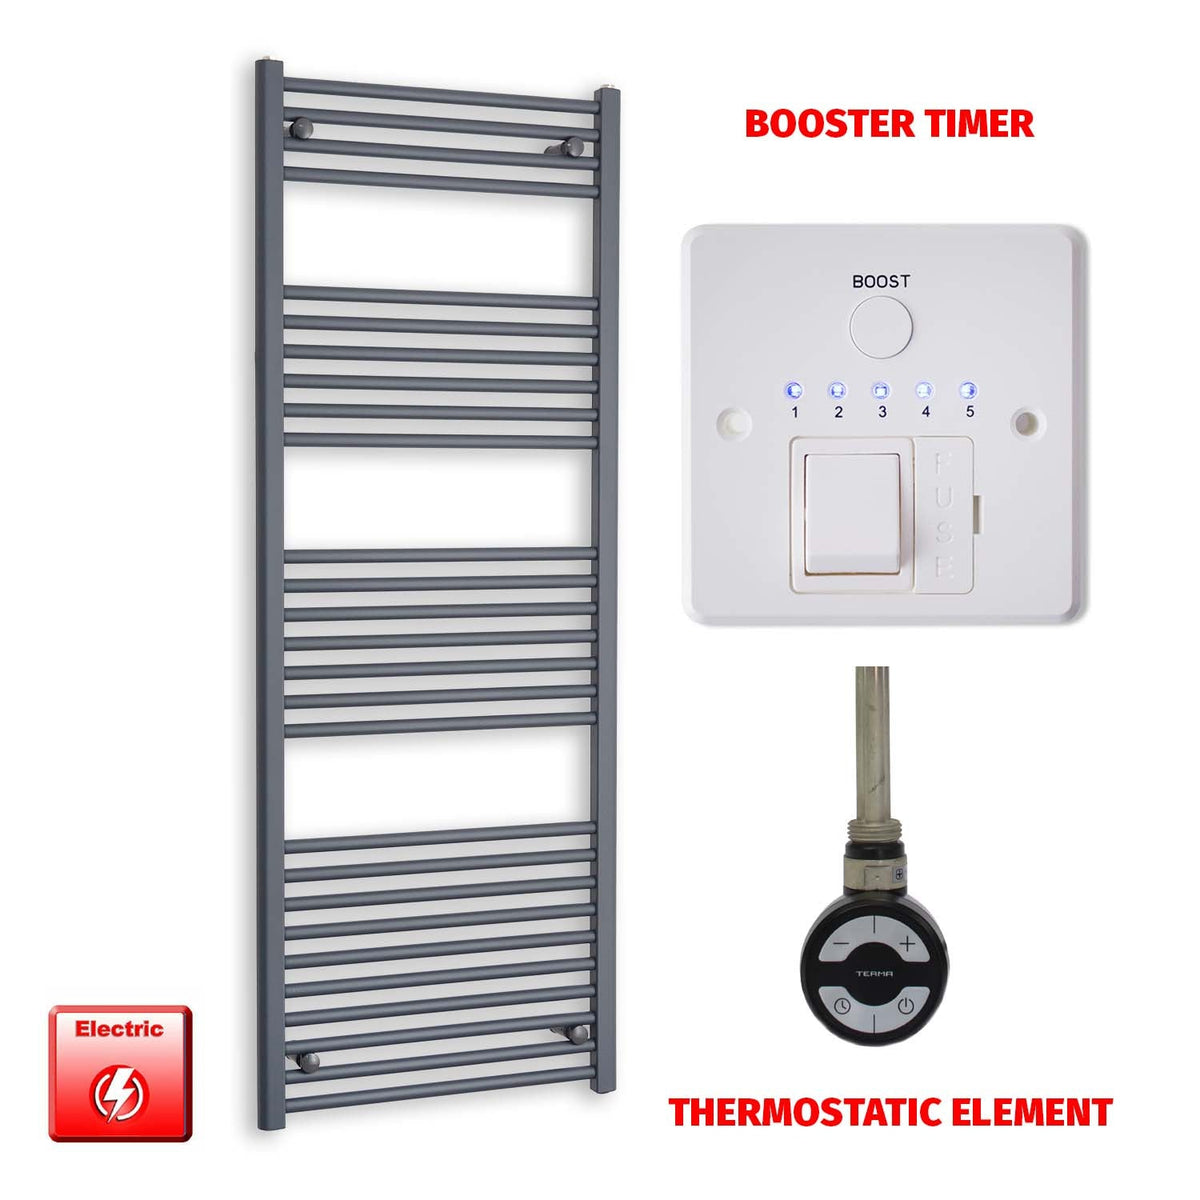 1600mm High 600mm Wide Flat Anthracite Pre-Filled Electric Heated Towel Rail Radiator HTR MOA Thermostatic element Booster  timer